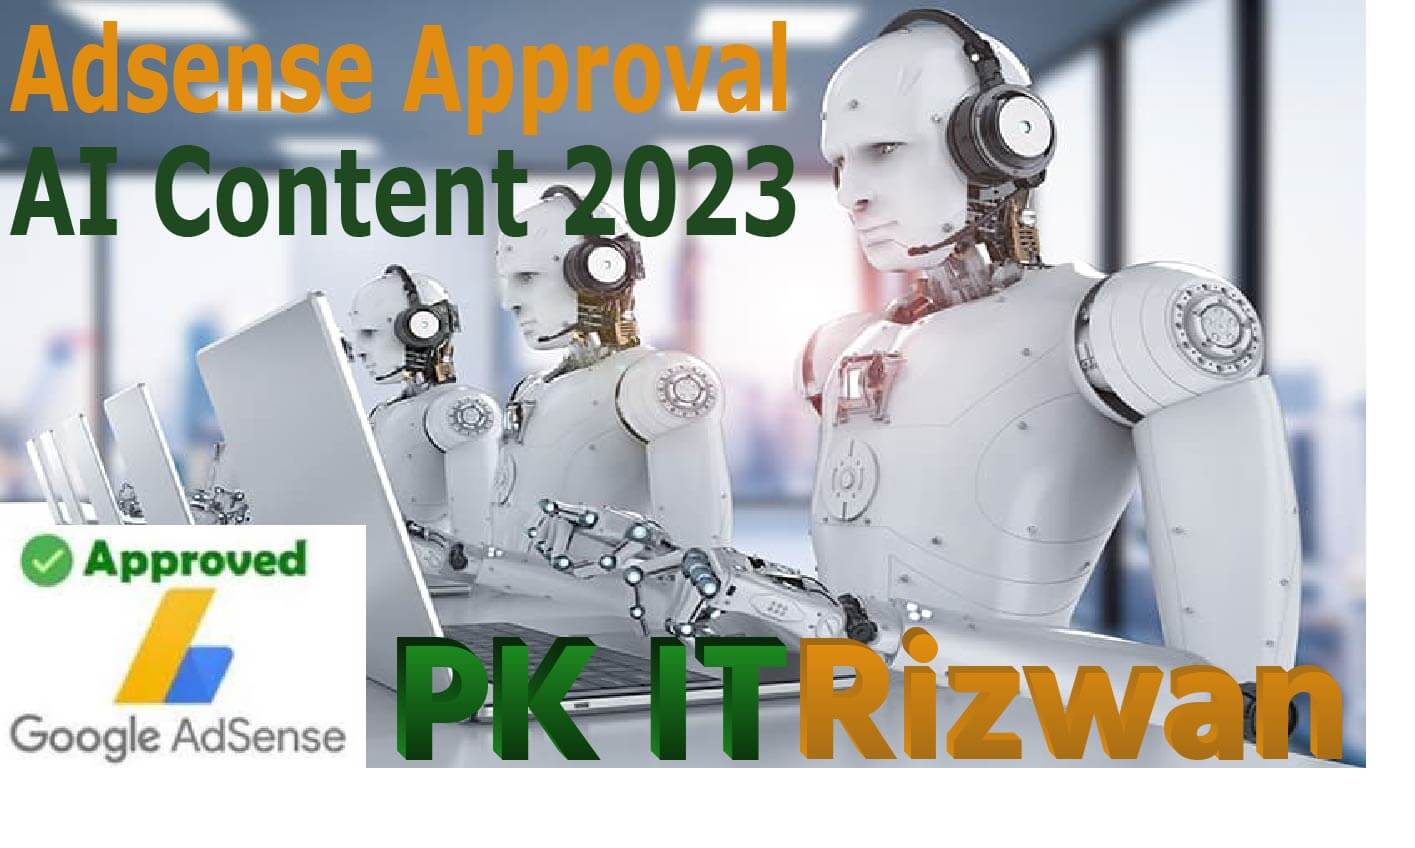 How to Get Adsense Approval for AI Content in 2023 post thumbnail image